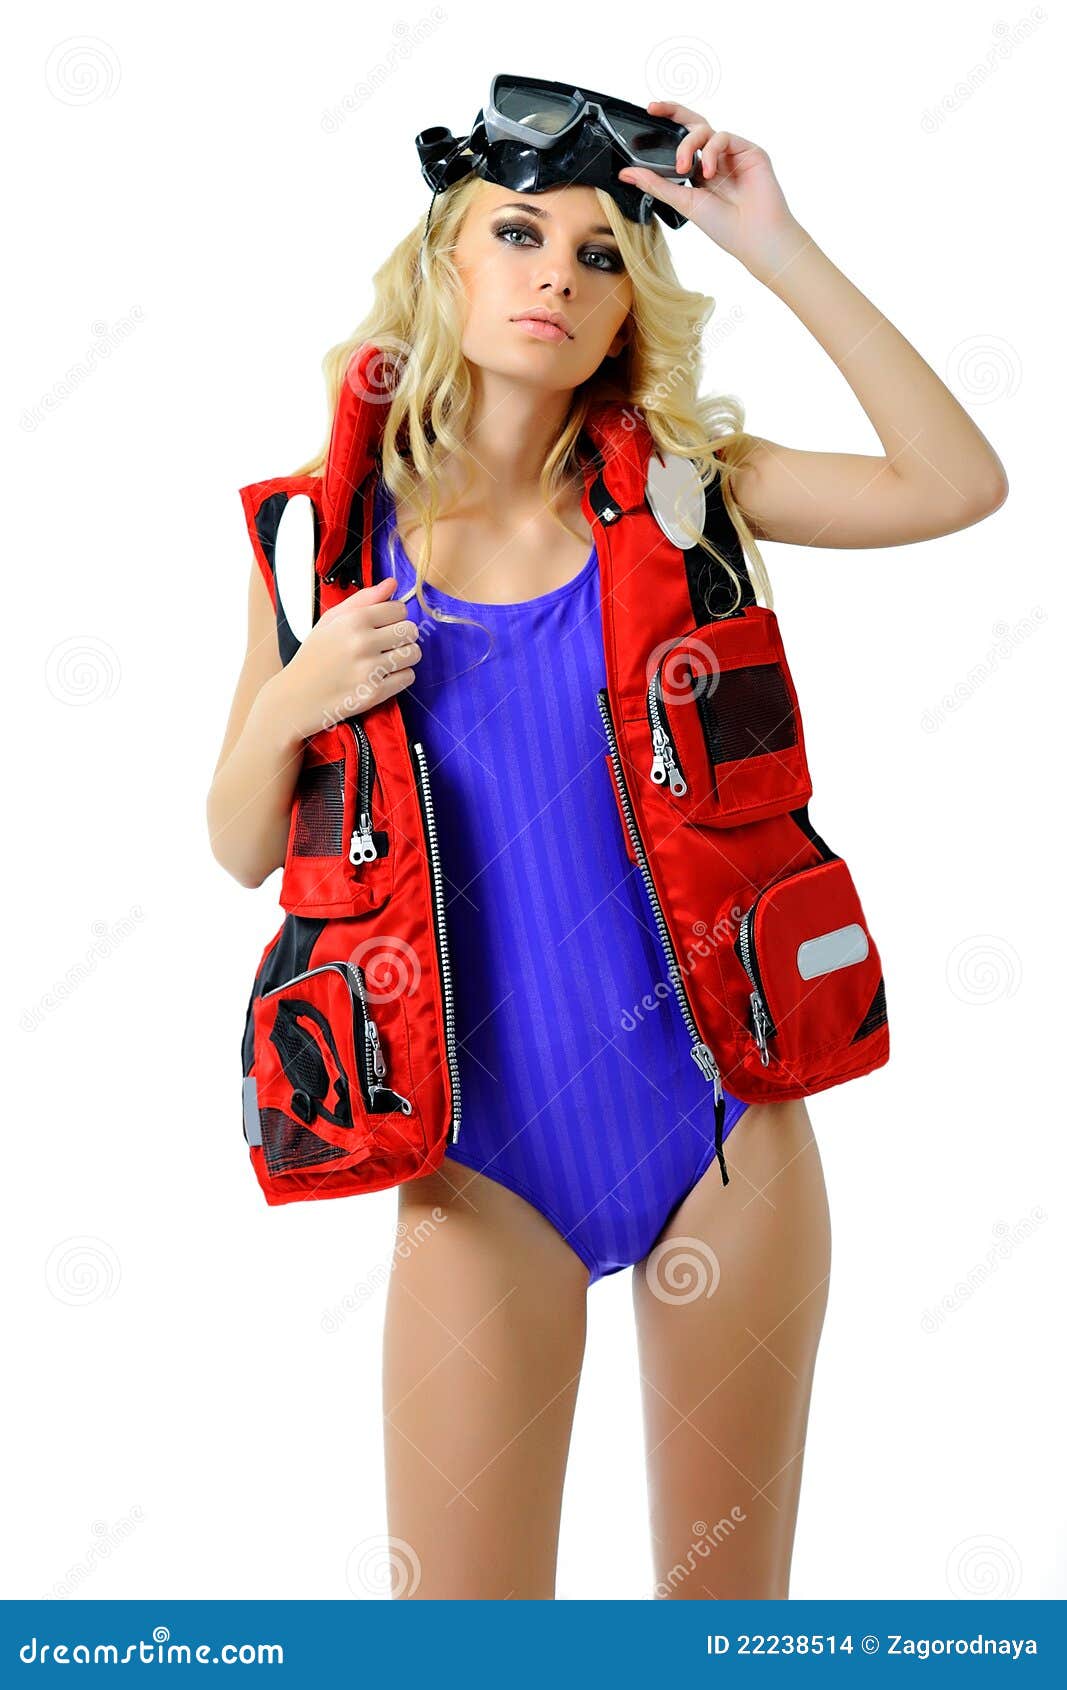 https://thumbs.dreamstime.com/z/girl-fishing-outfit-22238514.jpg